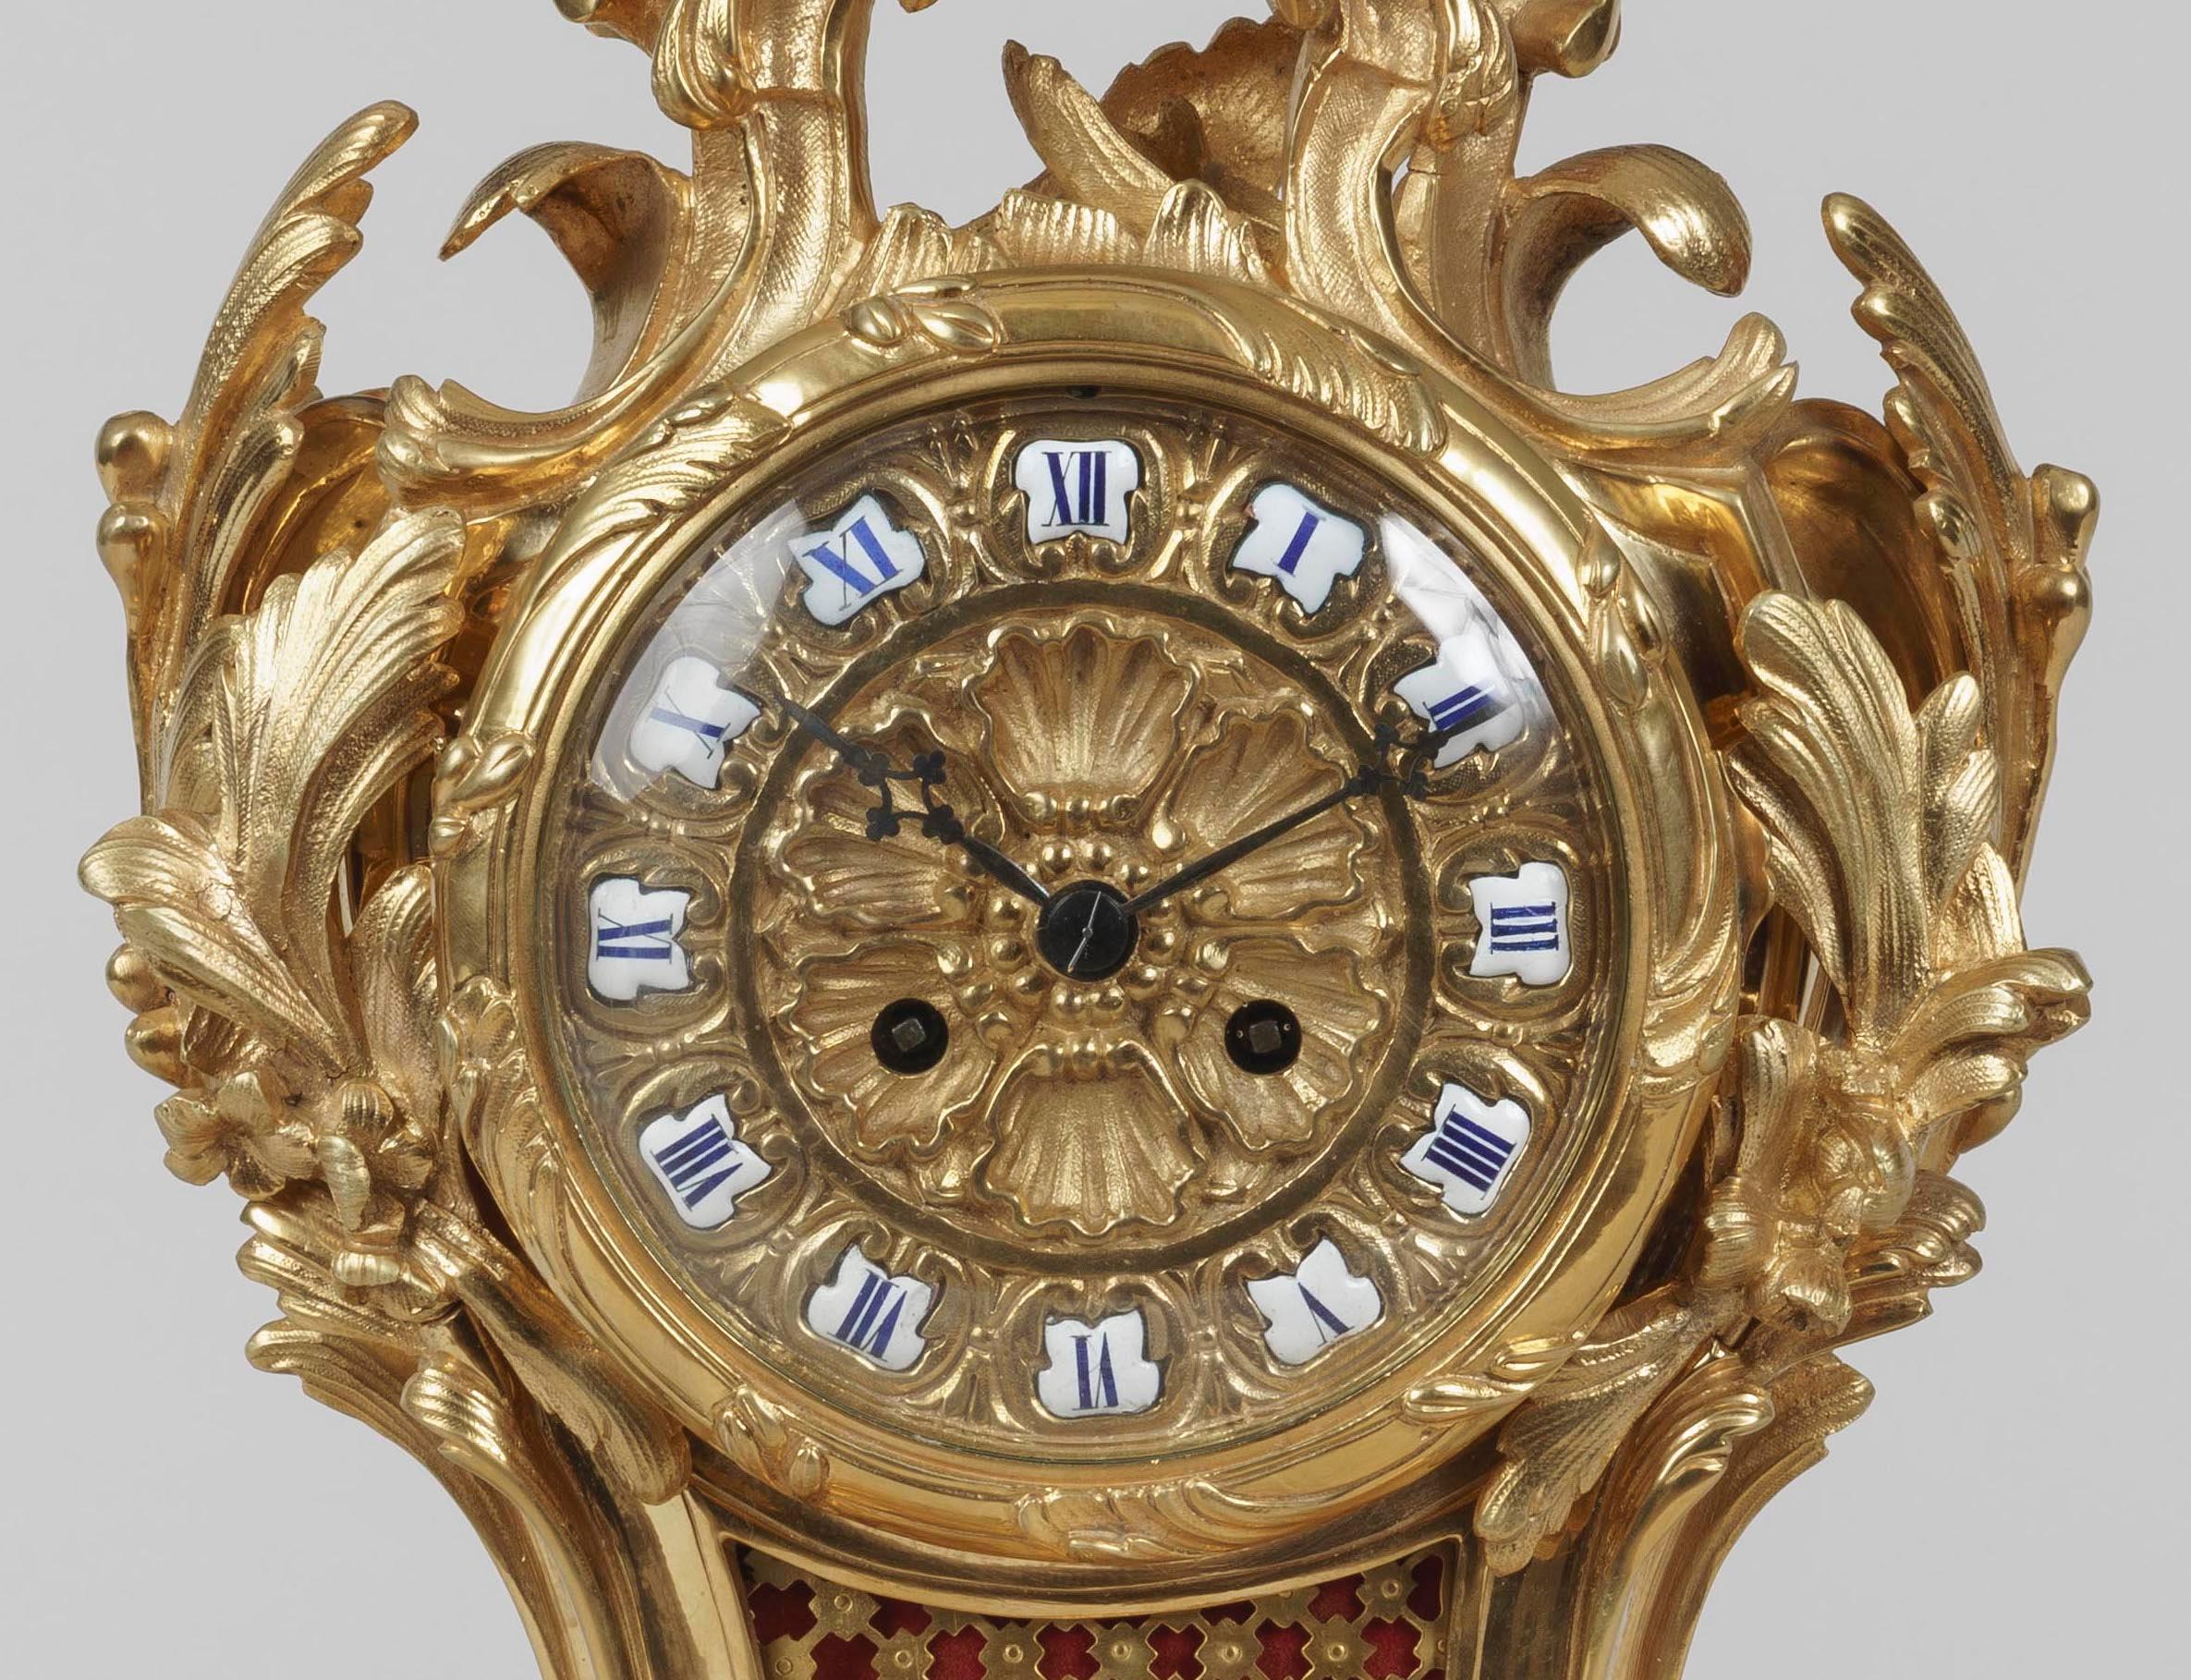 An Elegant Mantle Clock
In the Louis XV Manner

The clock and its plinth executed in gilt bronze in a dynamic rococo style, rising from scrolling foliage, the dial in the shape of a flower and having the hours marked by hand-painted porcelain roman